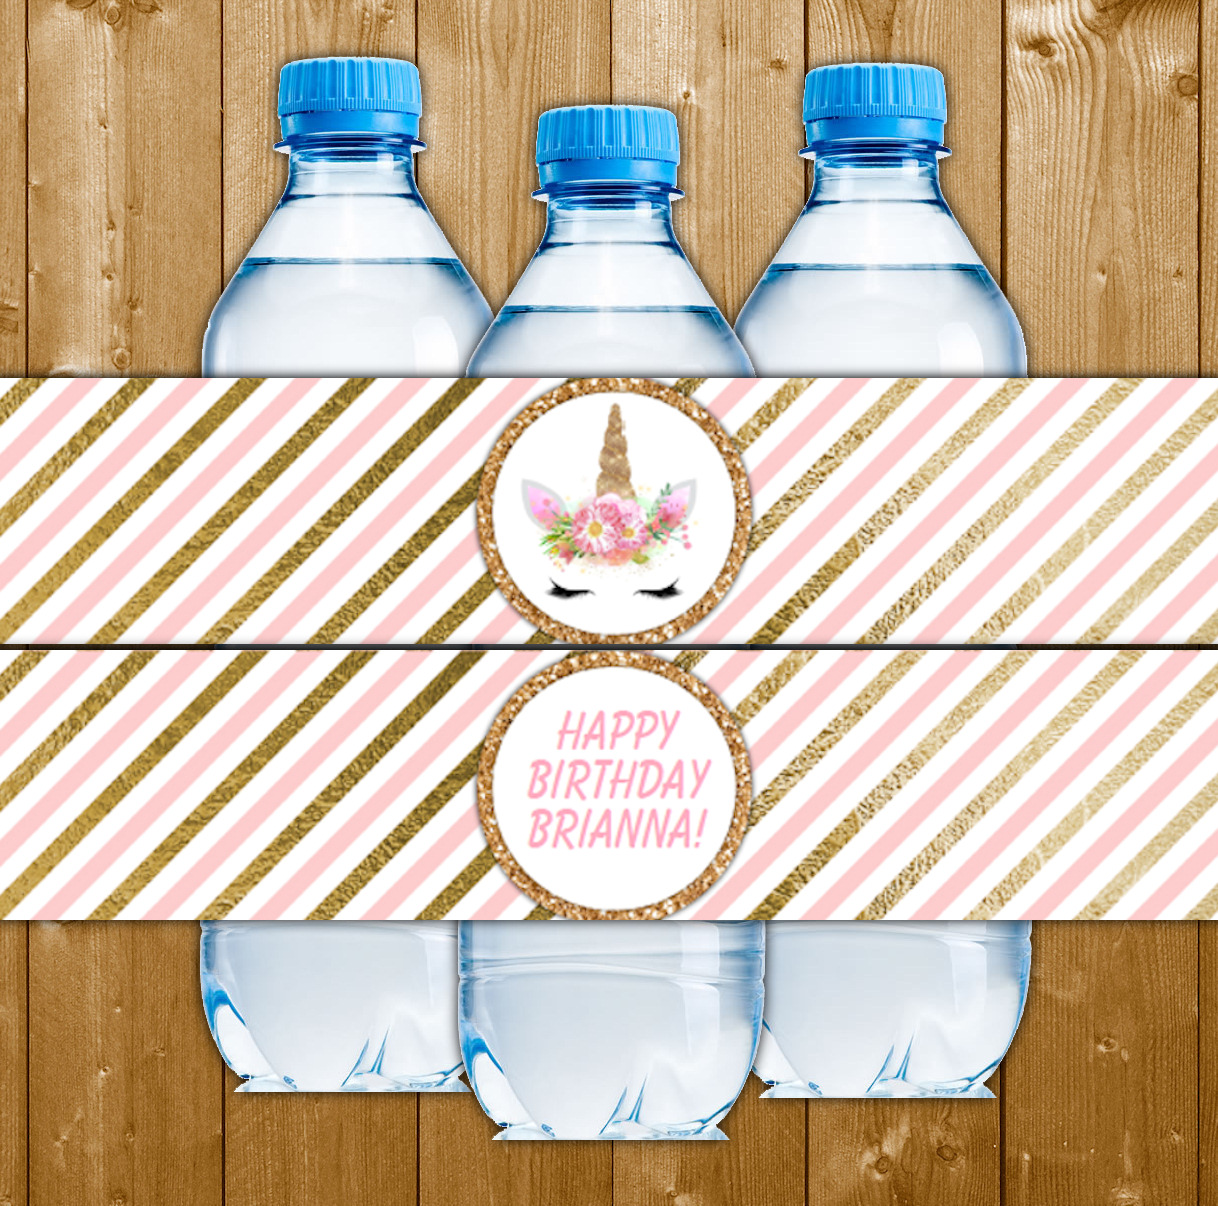 Magical Unicorns Party Water Bottle Label Party Printables Unicorn Birthday Party Water Bottle Wrapper Wittyprintables